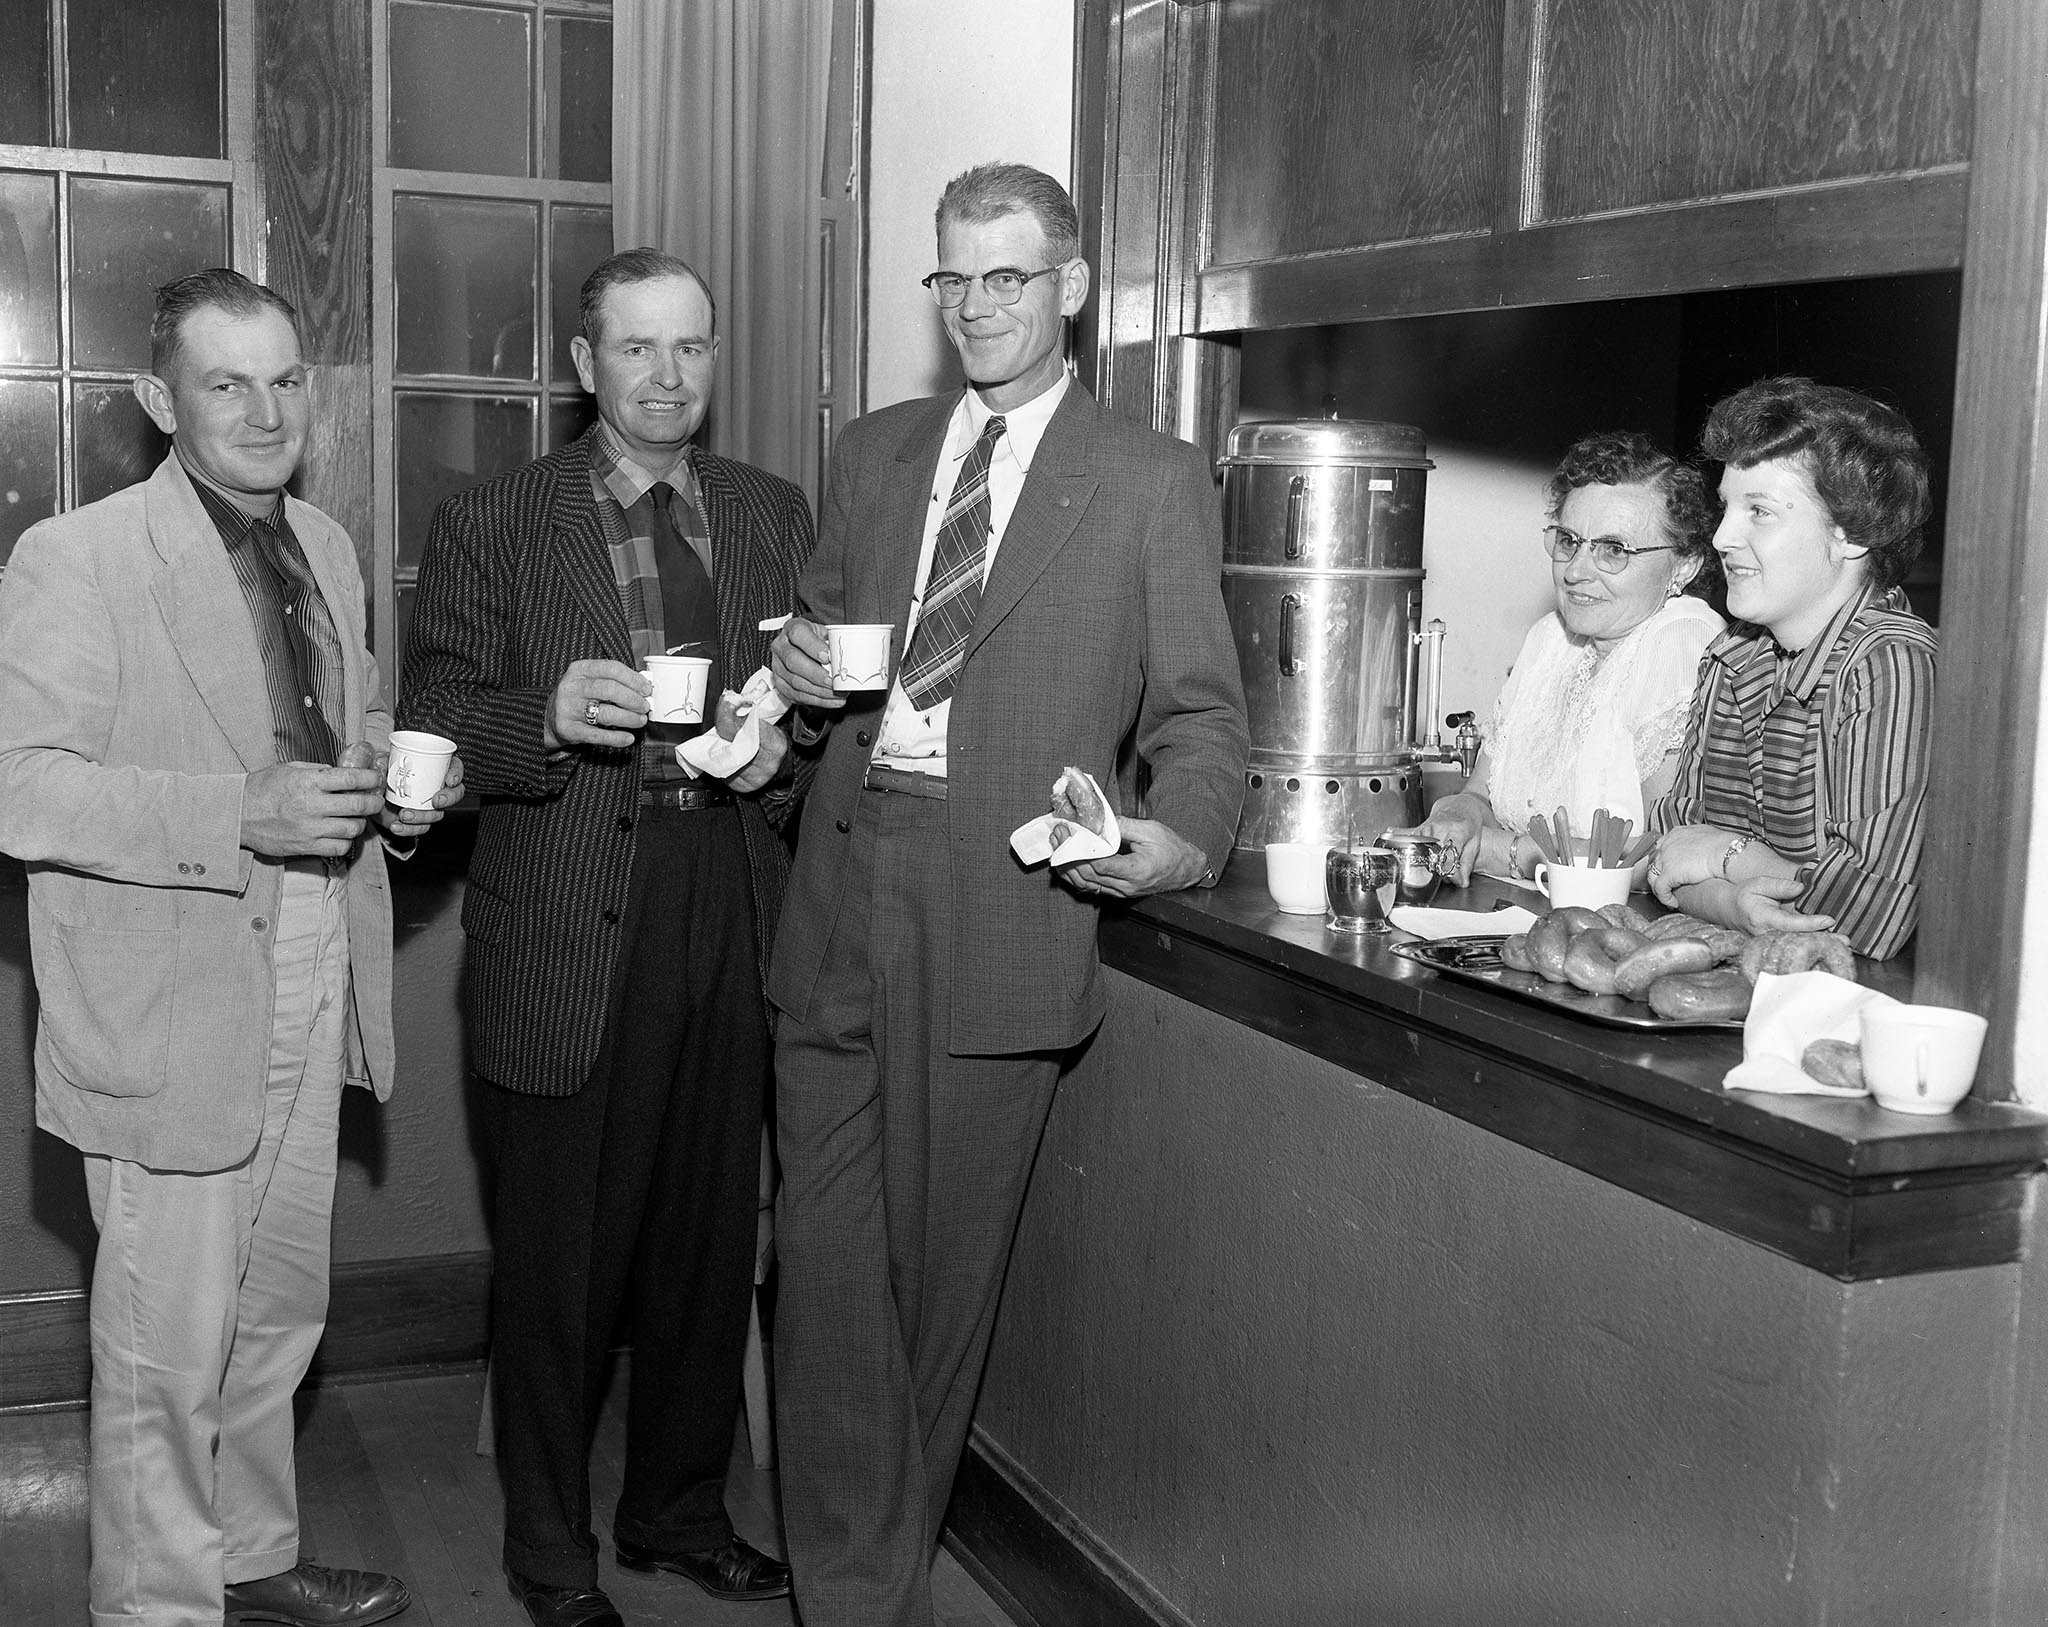 D.G. Meier Jr., Bennie Tice and Orval Swain enjoy coffee and doughnuts provided by Mrs. O.E. Redden and Mrs. Meier after the business session of Blaine County Farm Bureau’s annual meeting in 1957. The event was also attended by a number of foreign agricultural information workers who were touring the nation to study American information and  extension services.